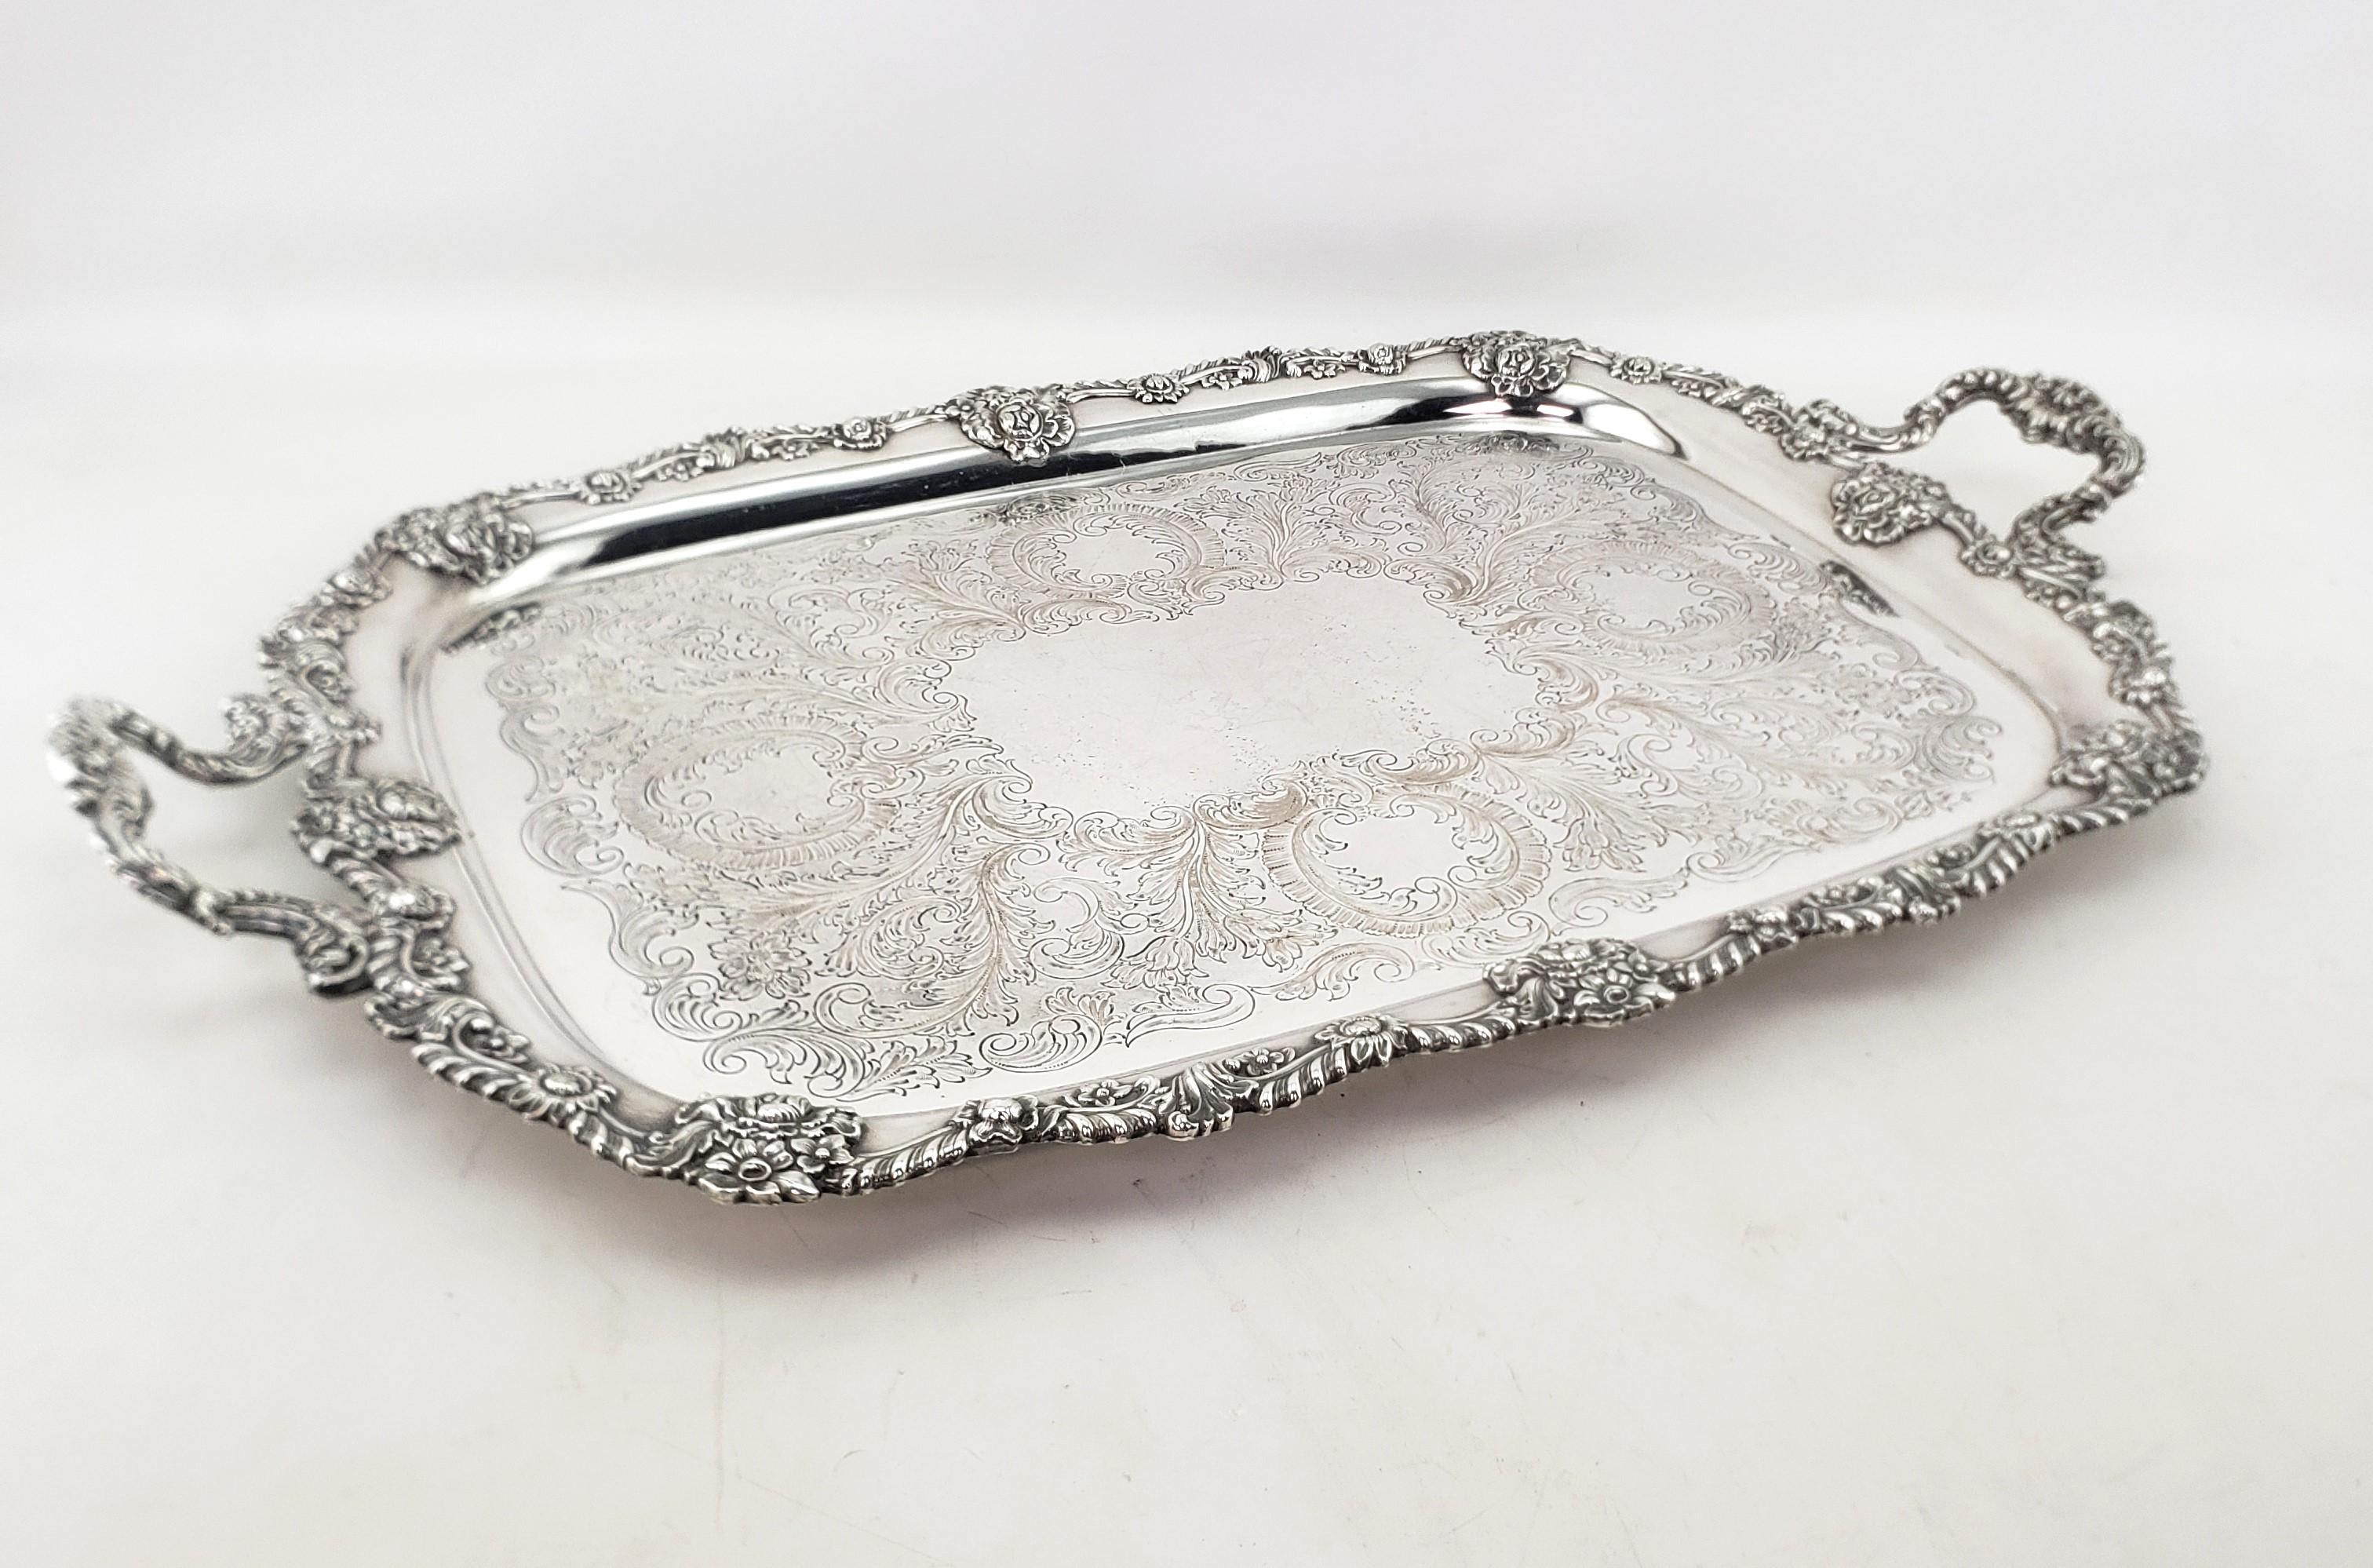 This very large and substantial antique serving tray is hallmarked by an unknown maker, but originated from England and dates to approximately 1880 and done in the period Victorian style. The tray is composed of silver plate and features an ornate